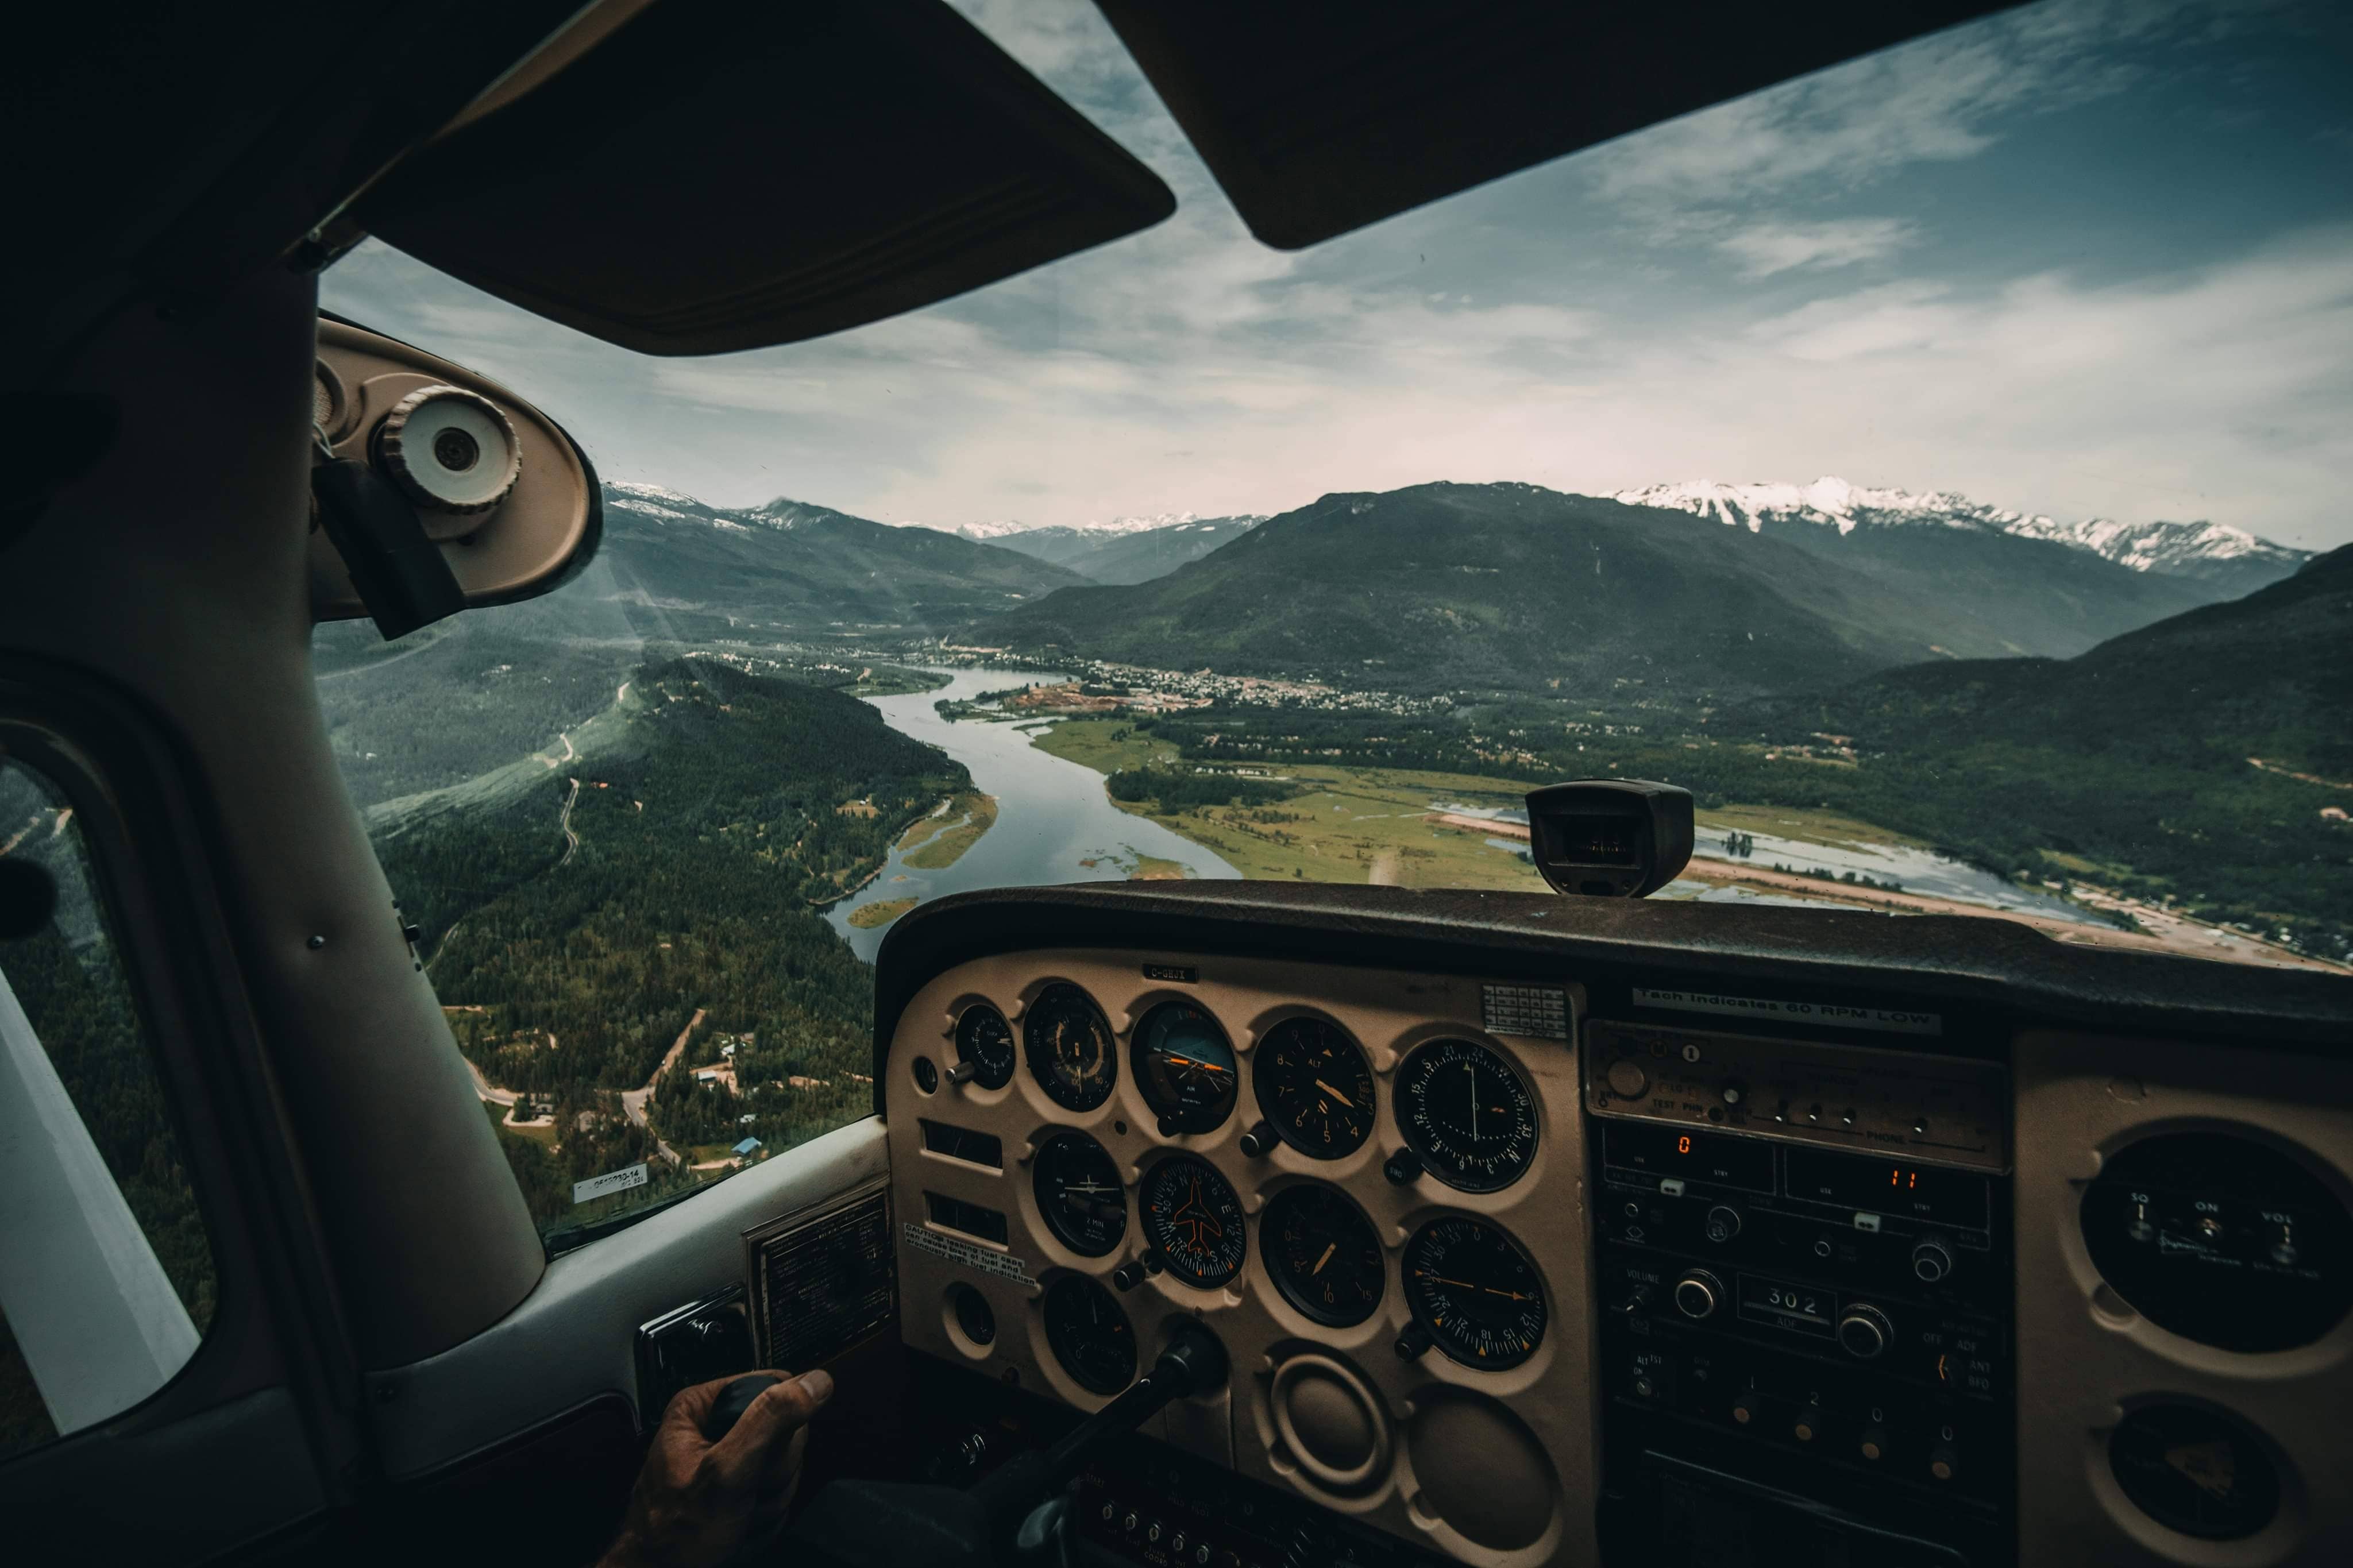 View from the Inside of a Plane Overlooking Mountains by Jordan McGrath